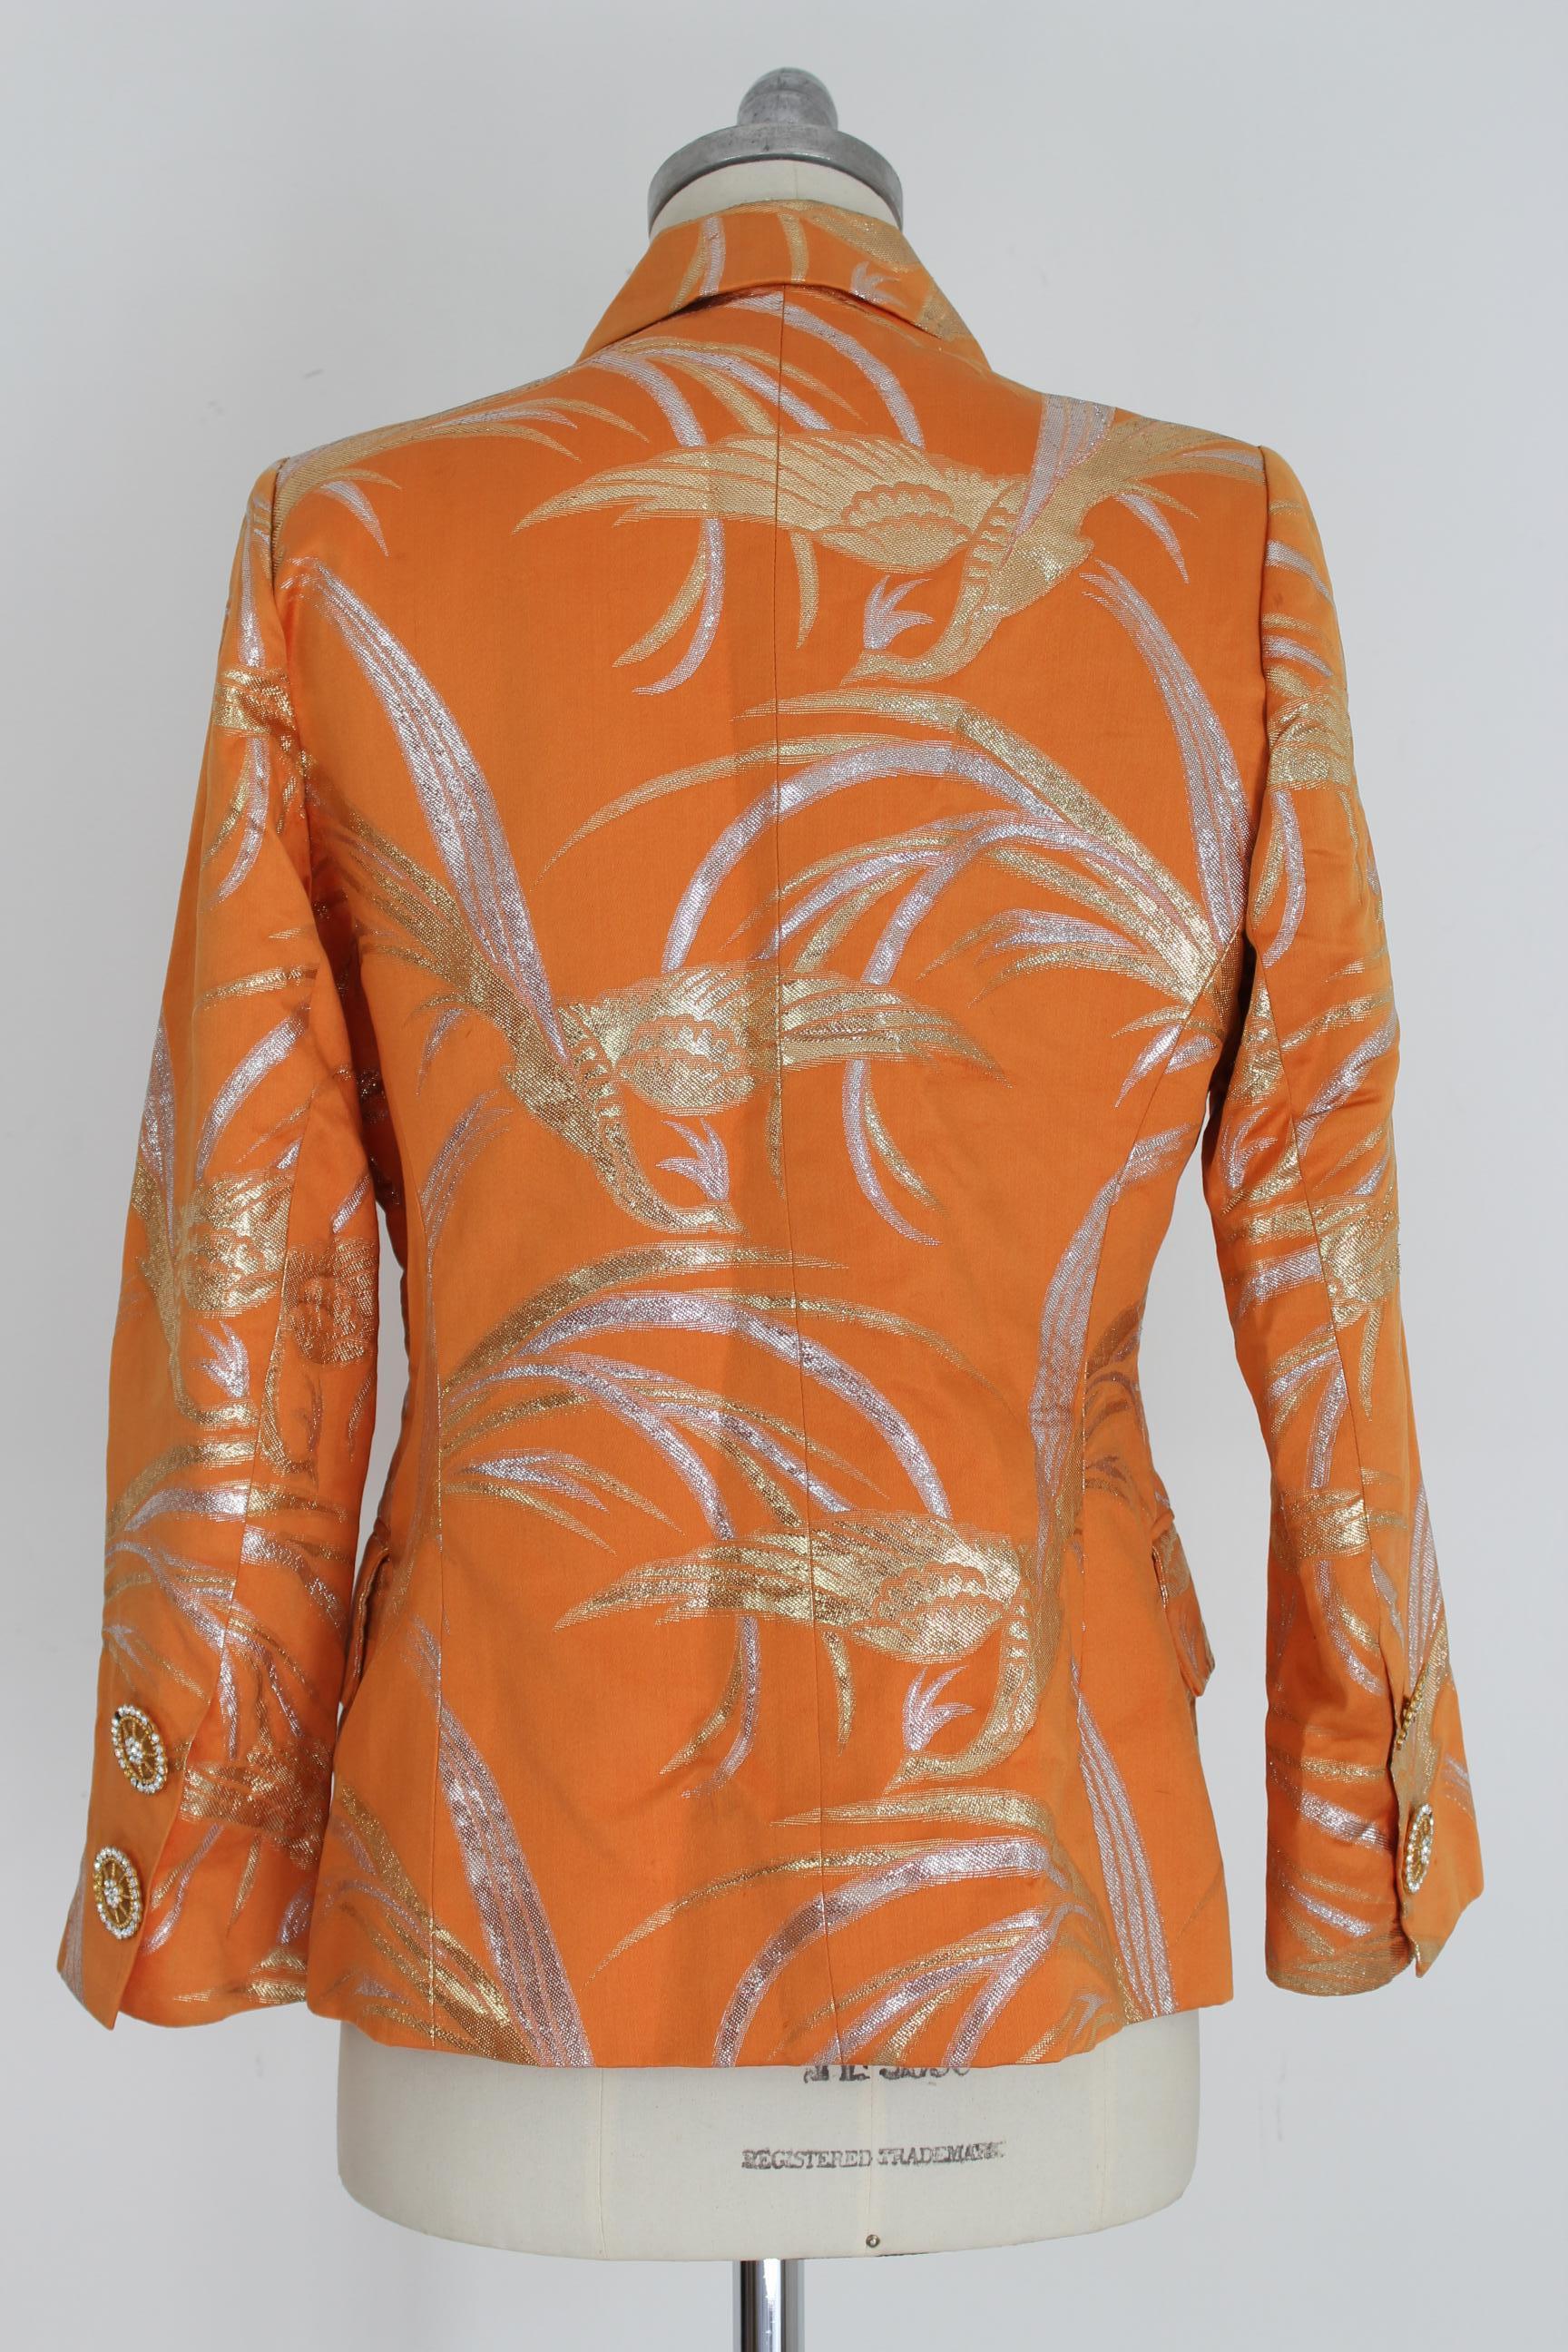 Christian Dior Boutique vintage 80s women's jacket. Evening blazer, short model double-breasted, color orange with floral designs lamè silver and gold . 100% Silk Chanto. Jewel buttons with swarosky . Made in France. Excellent vintage conditions.